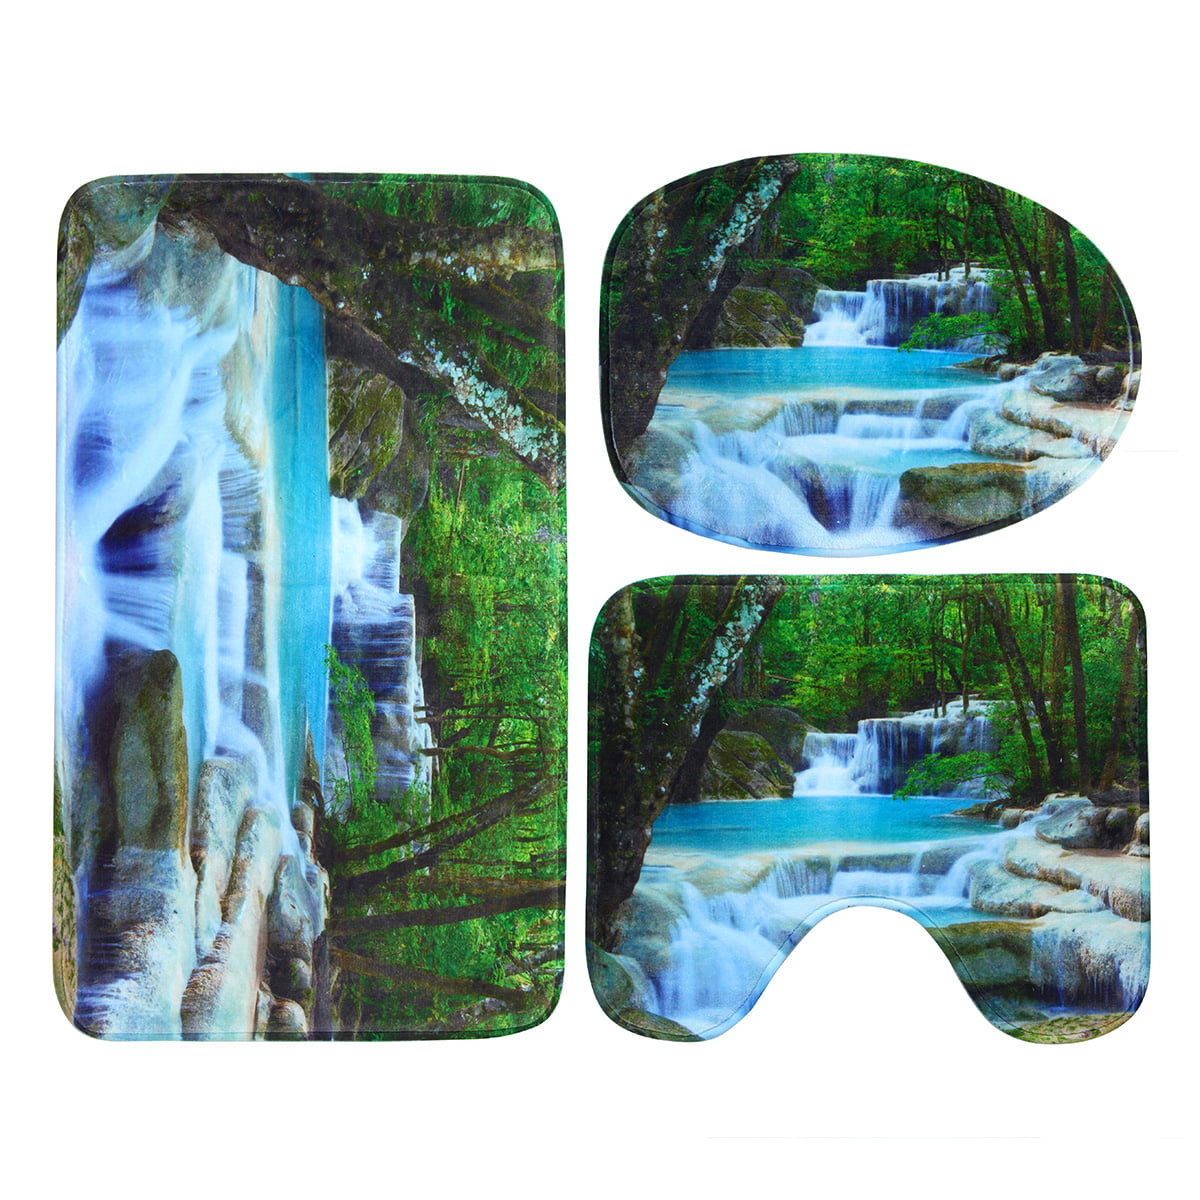 Waterfall Nature Scenery Shower Curtain Bathroom Washable Screens With Hooks 